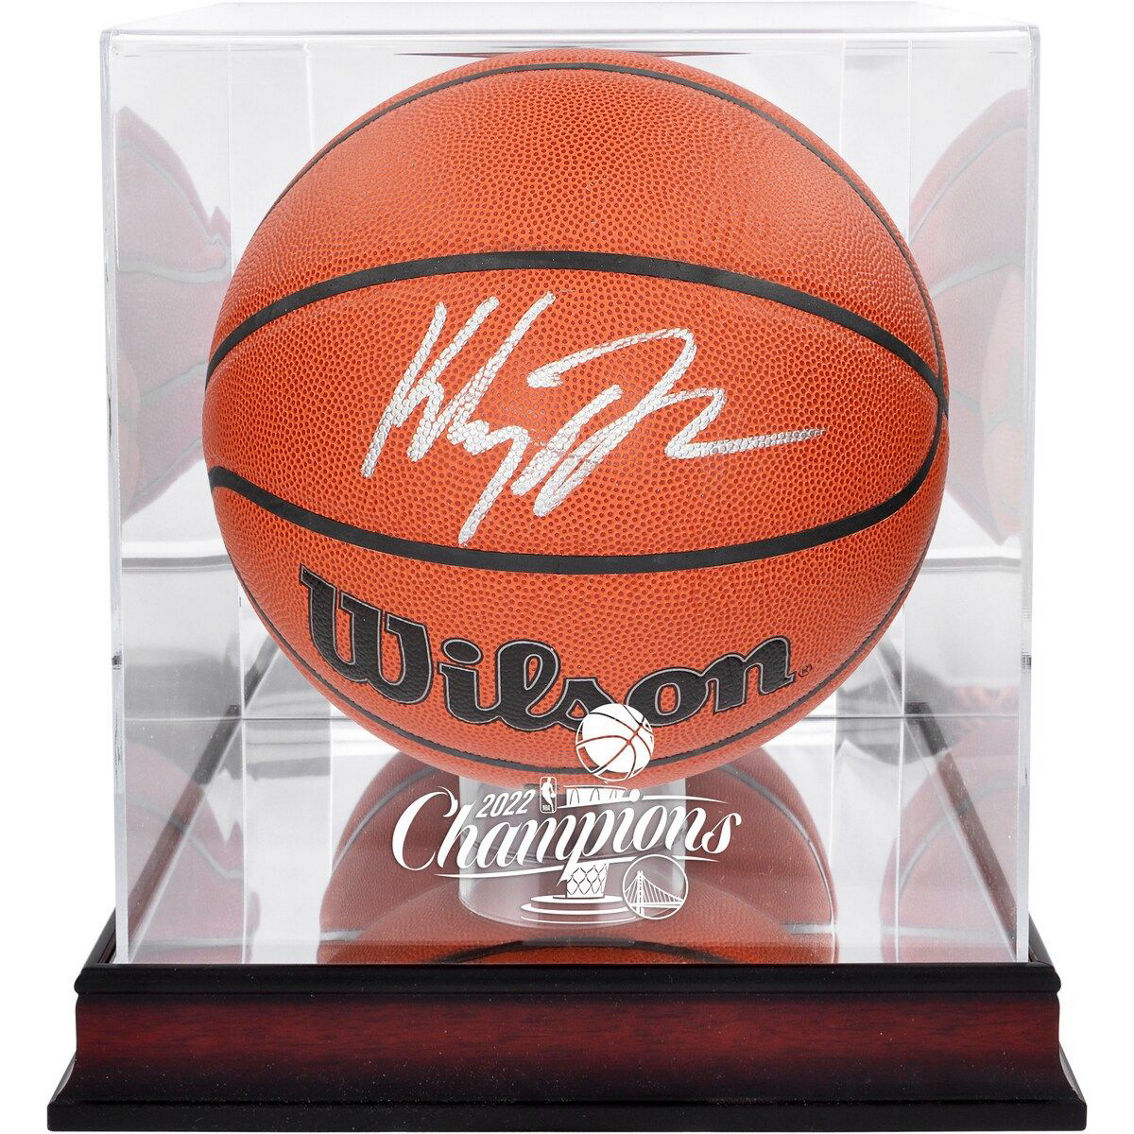 Fanatics Authentic Klay Thompson Golden State Warriors Autographed Wilson Indoor/Outdoor Basketball with Mahogany Team Logo Display Case - Image 2 of 2